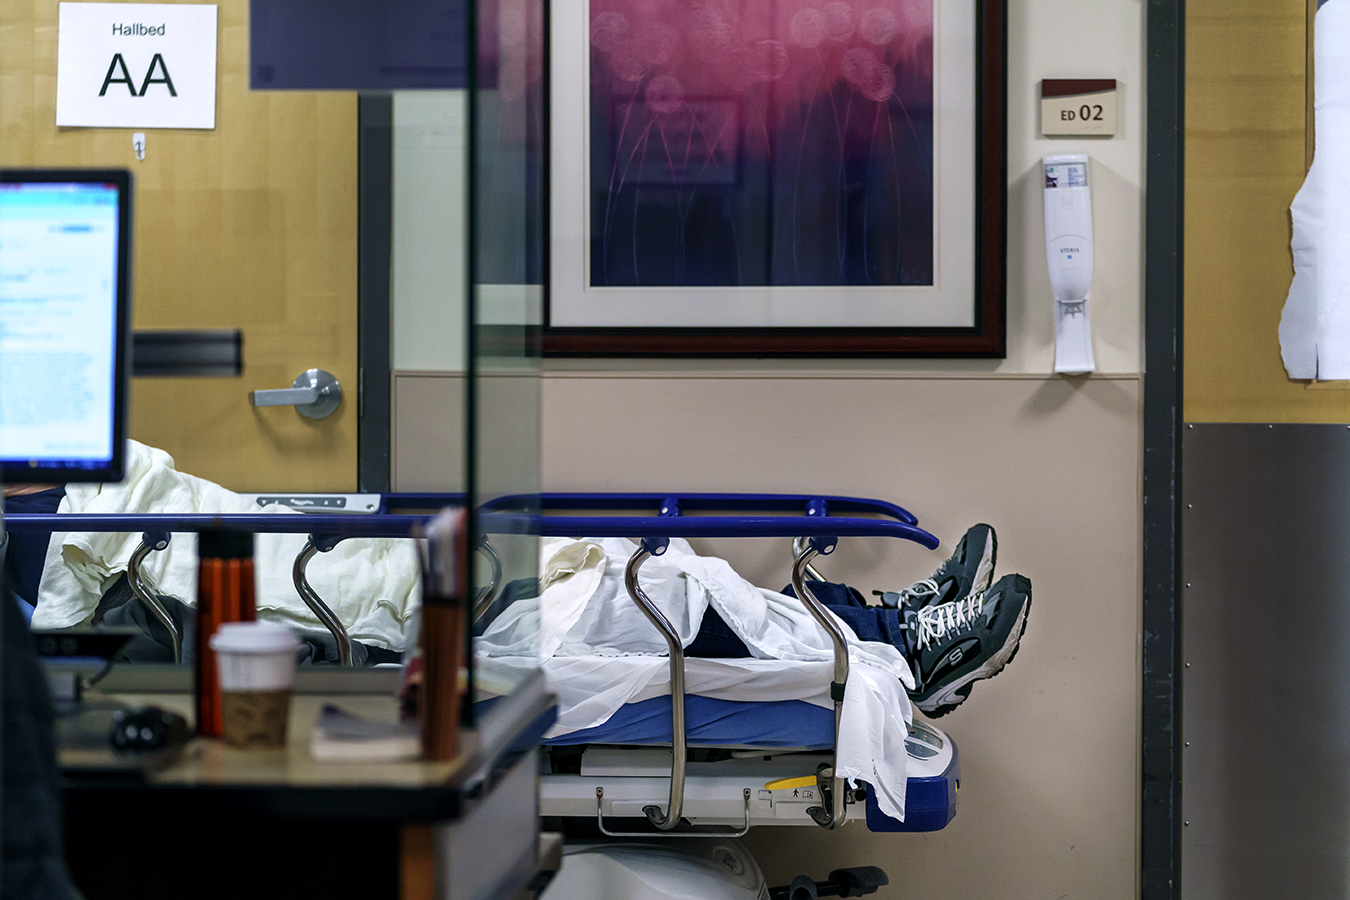 Non-identifiable patient lies in a gurney in a hospital hallway